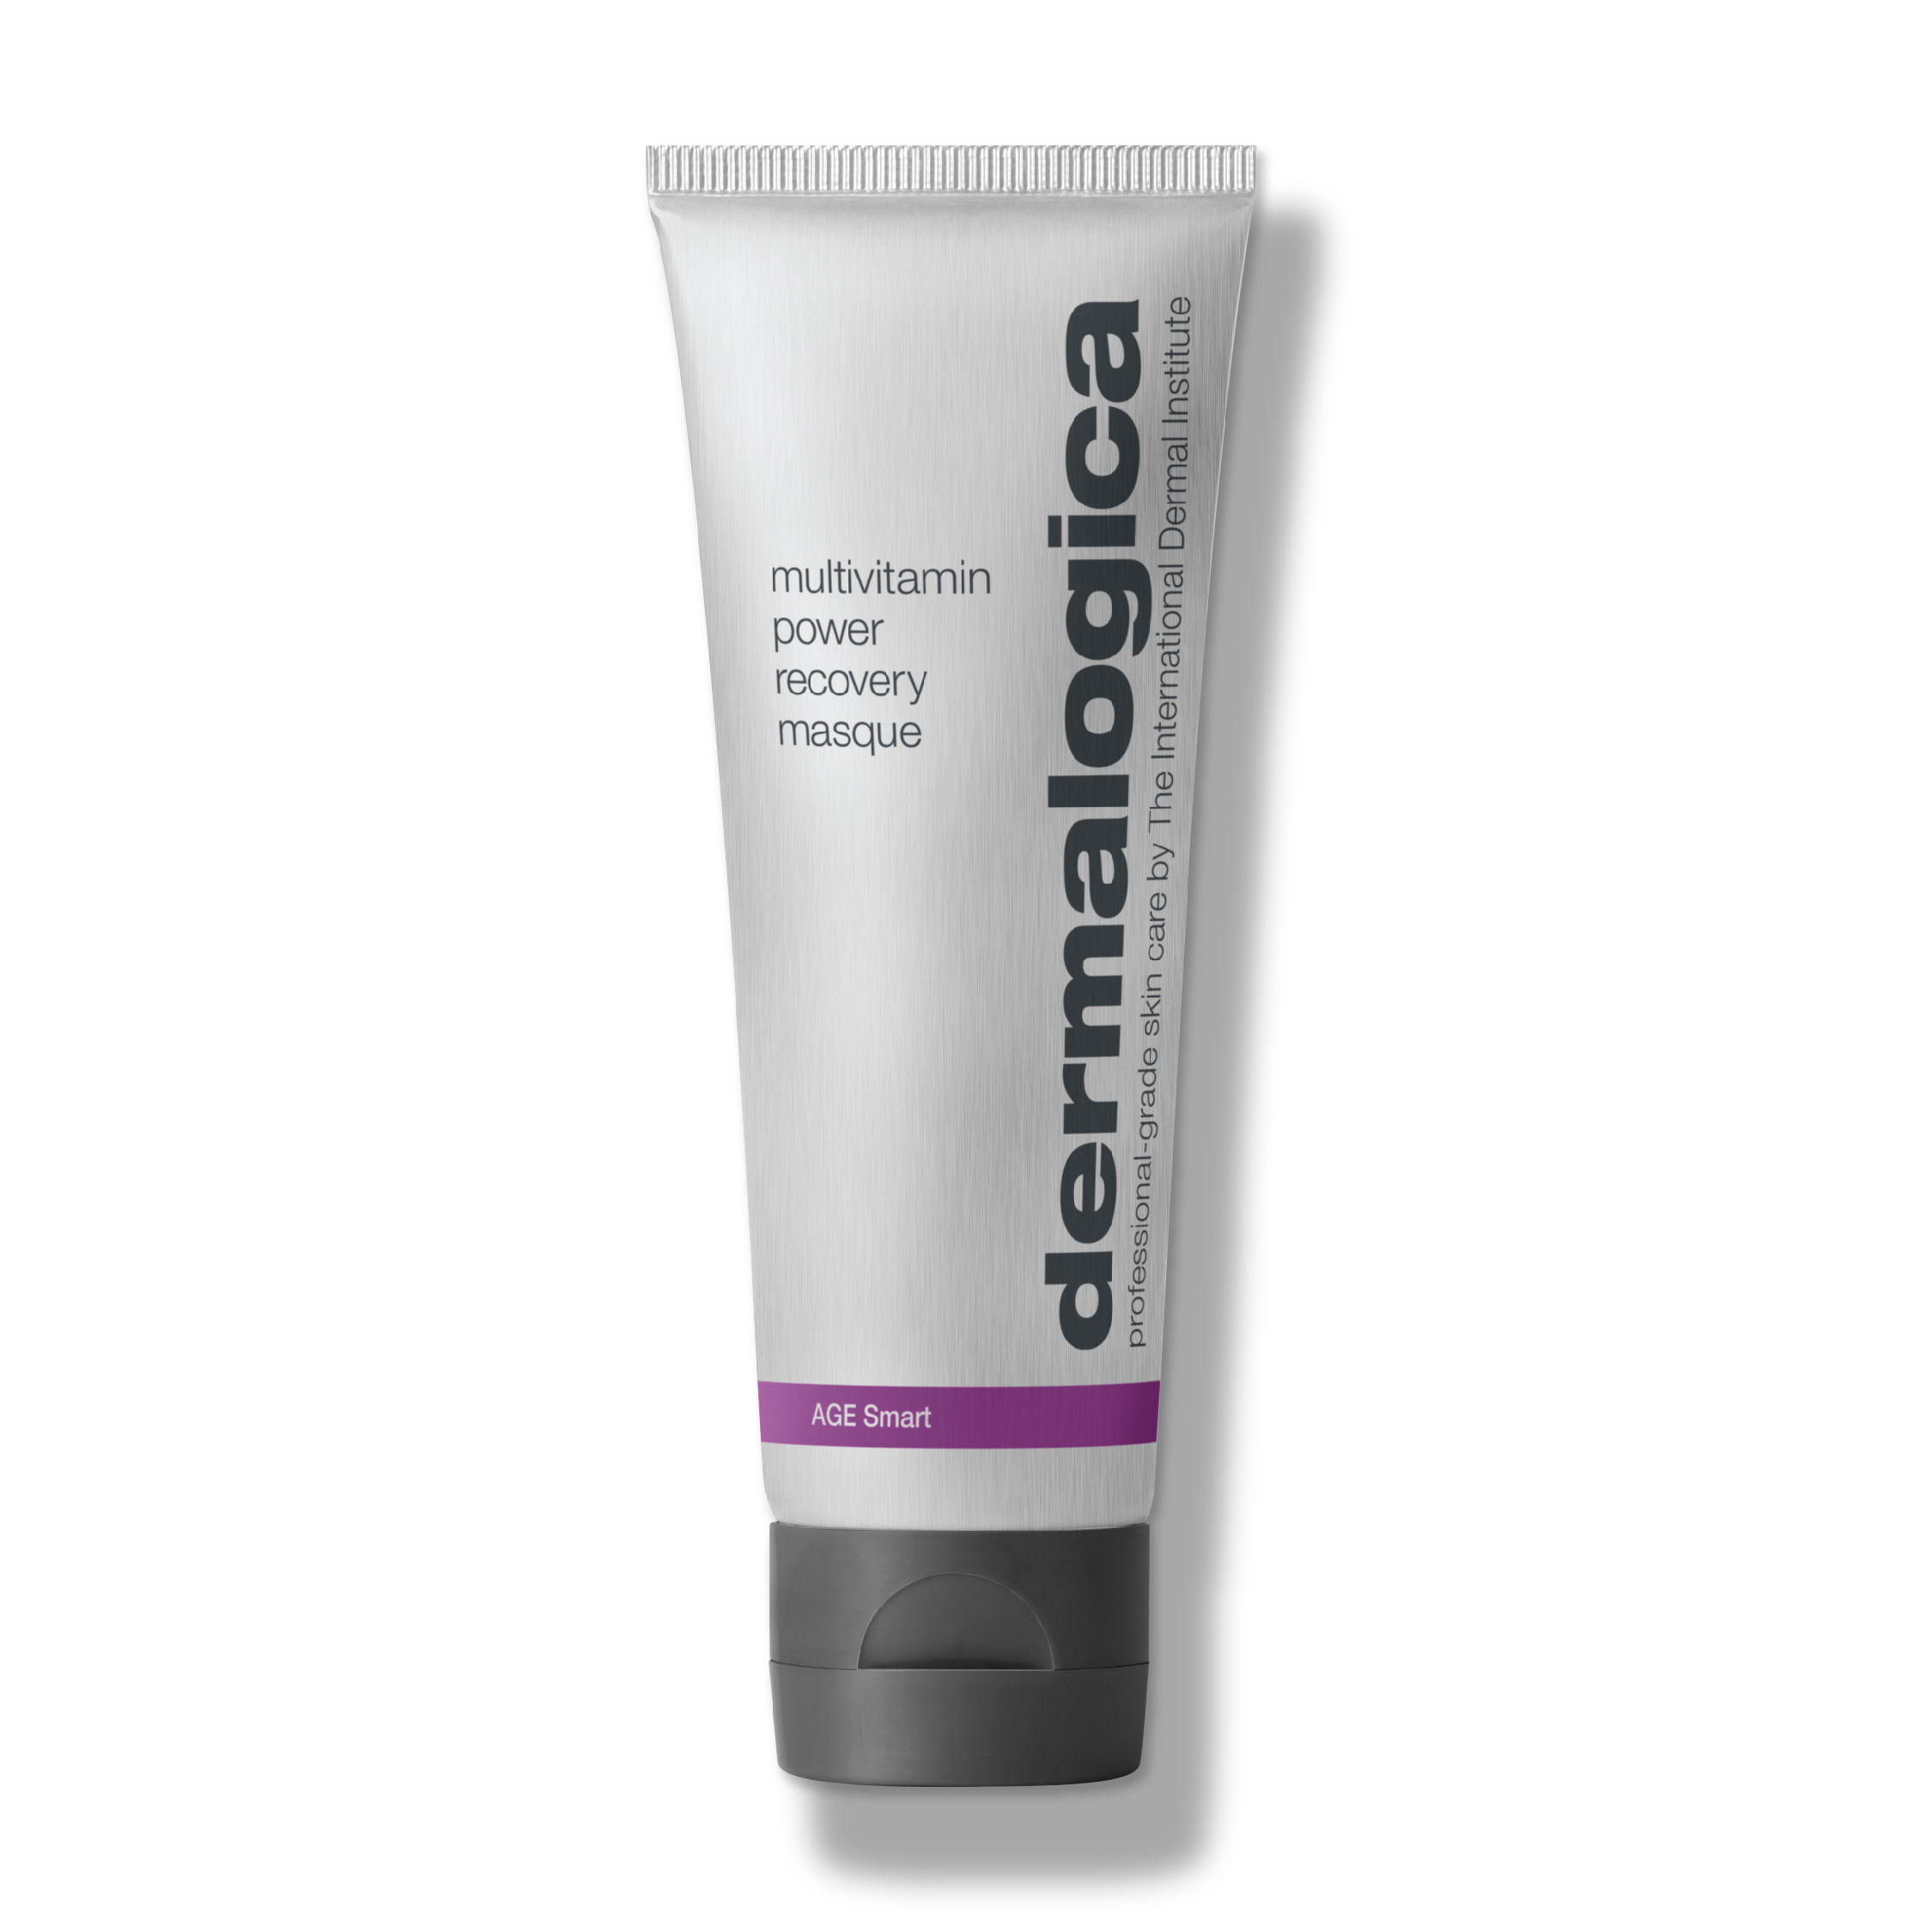 Dermalogica MultiVit Power Recovery Masque Face Mask for Glowing Skin With Vitamin A,C,E,F & B5